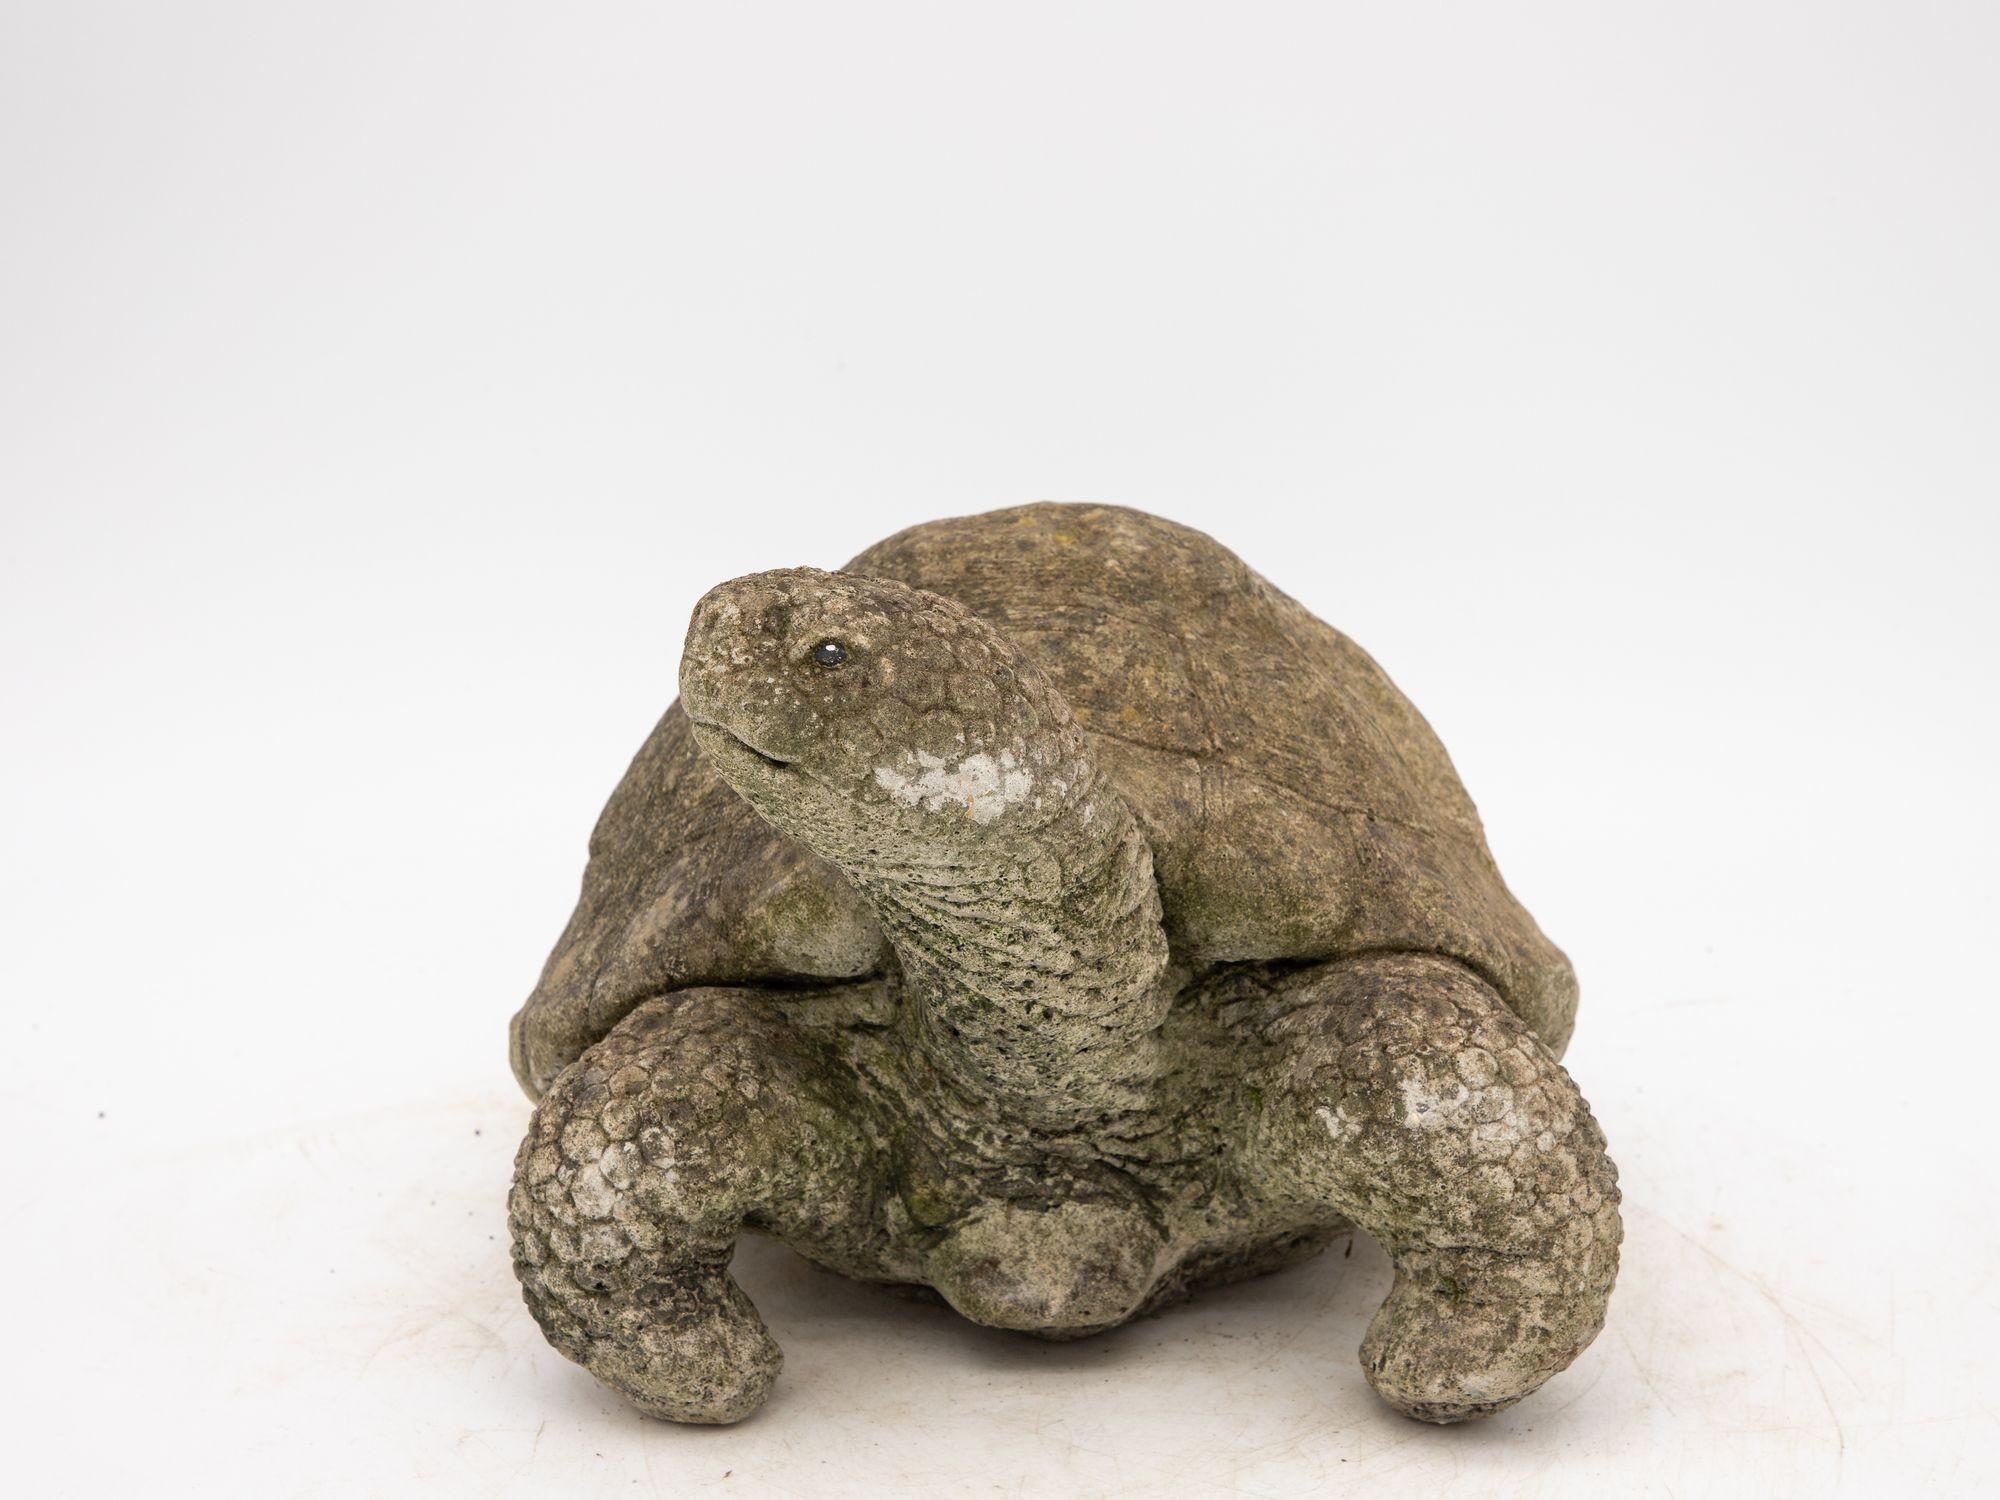 This mid-20th century vintage concrete garden ornament, originating from the United Kingdom, takes the form of a captivating tortoise or turtle. Its meticulous craftsmanship is evident in the intricate detailing of the tortoise shell, which